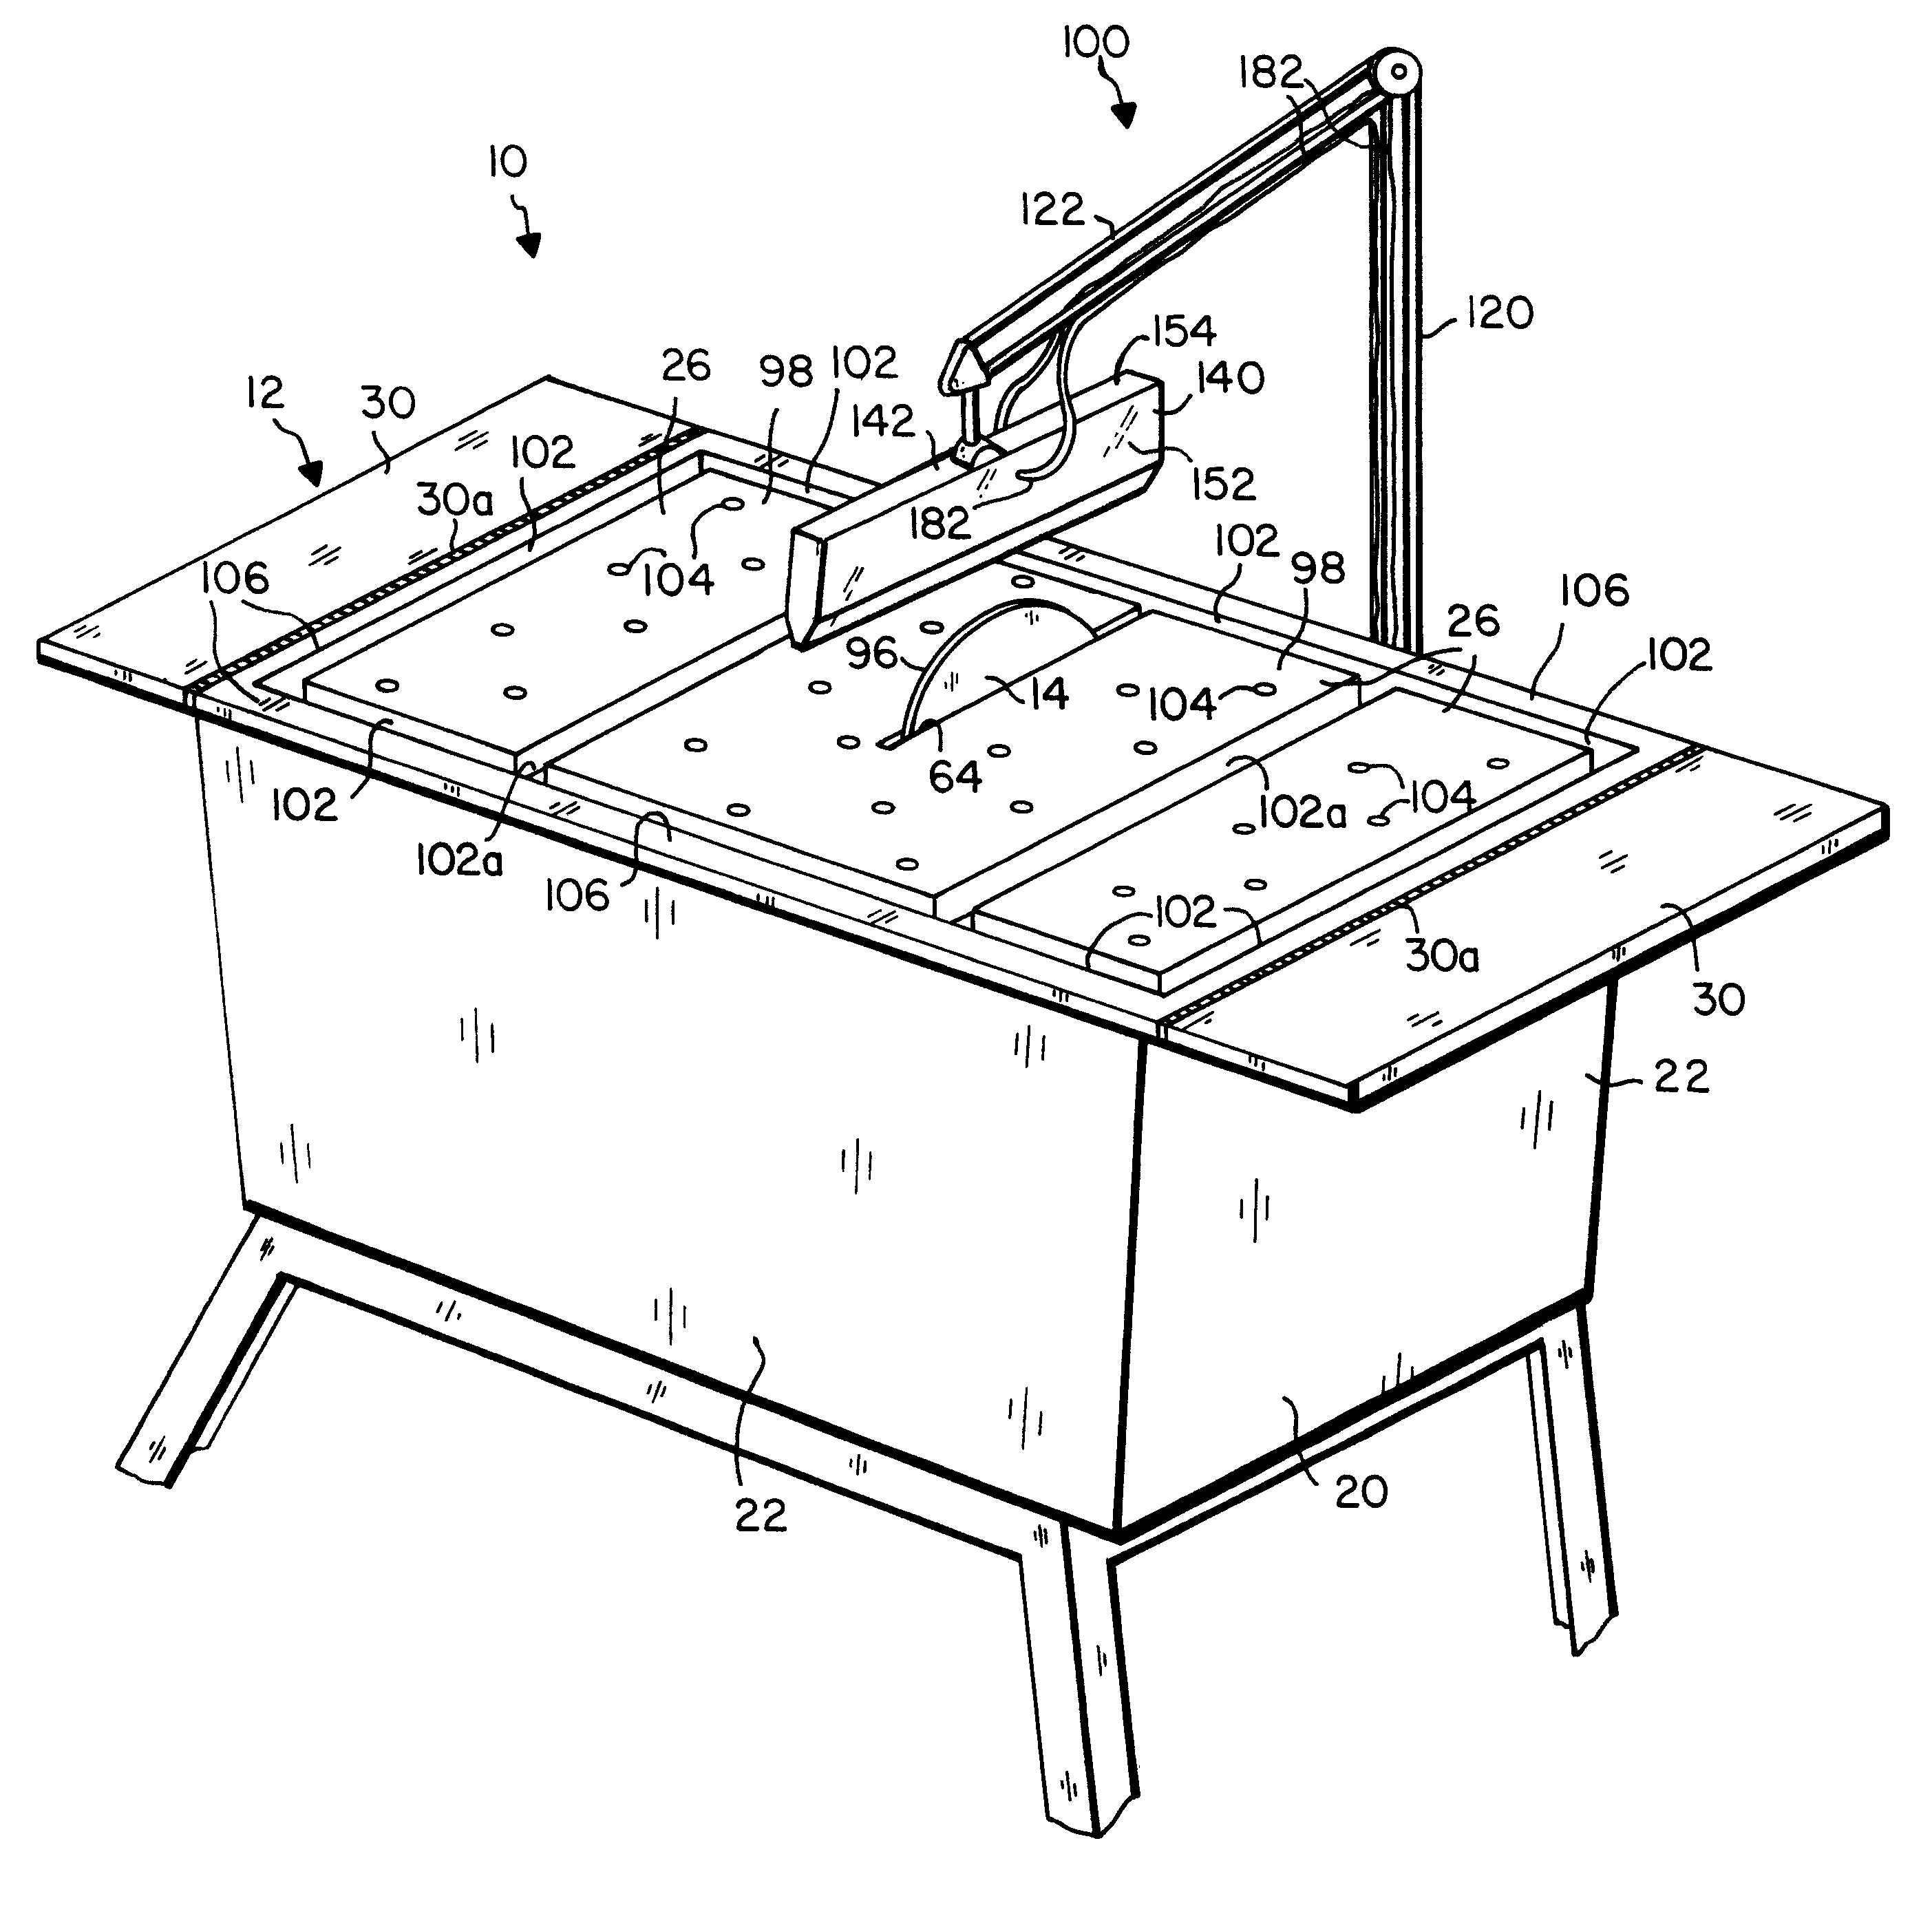 Stone and tile table saw apparatus